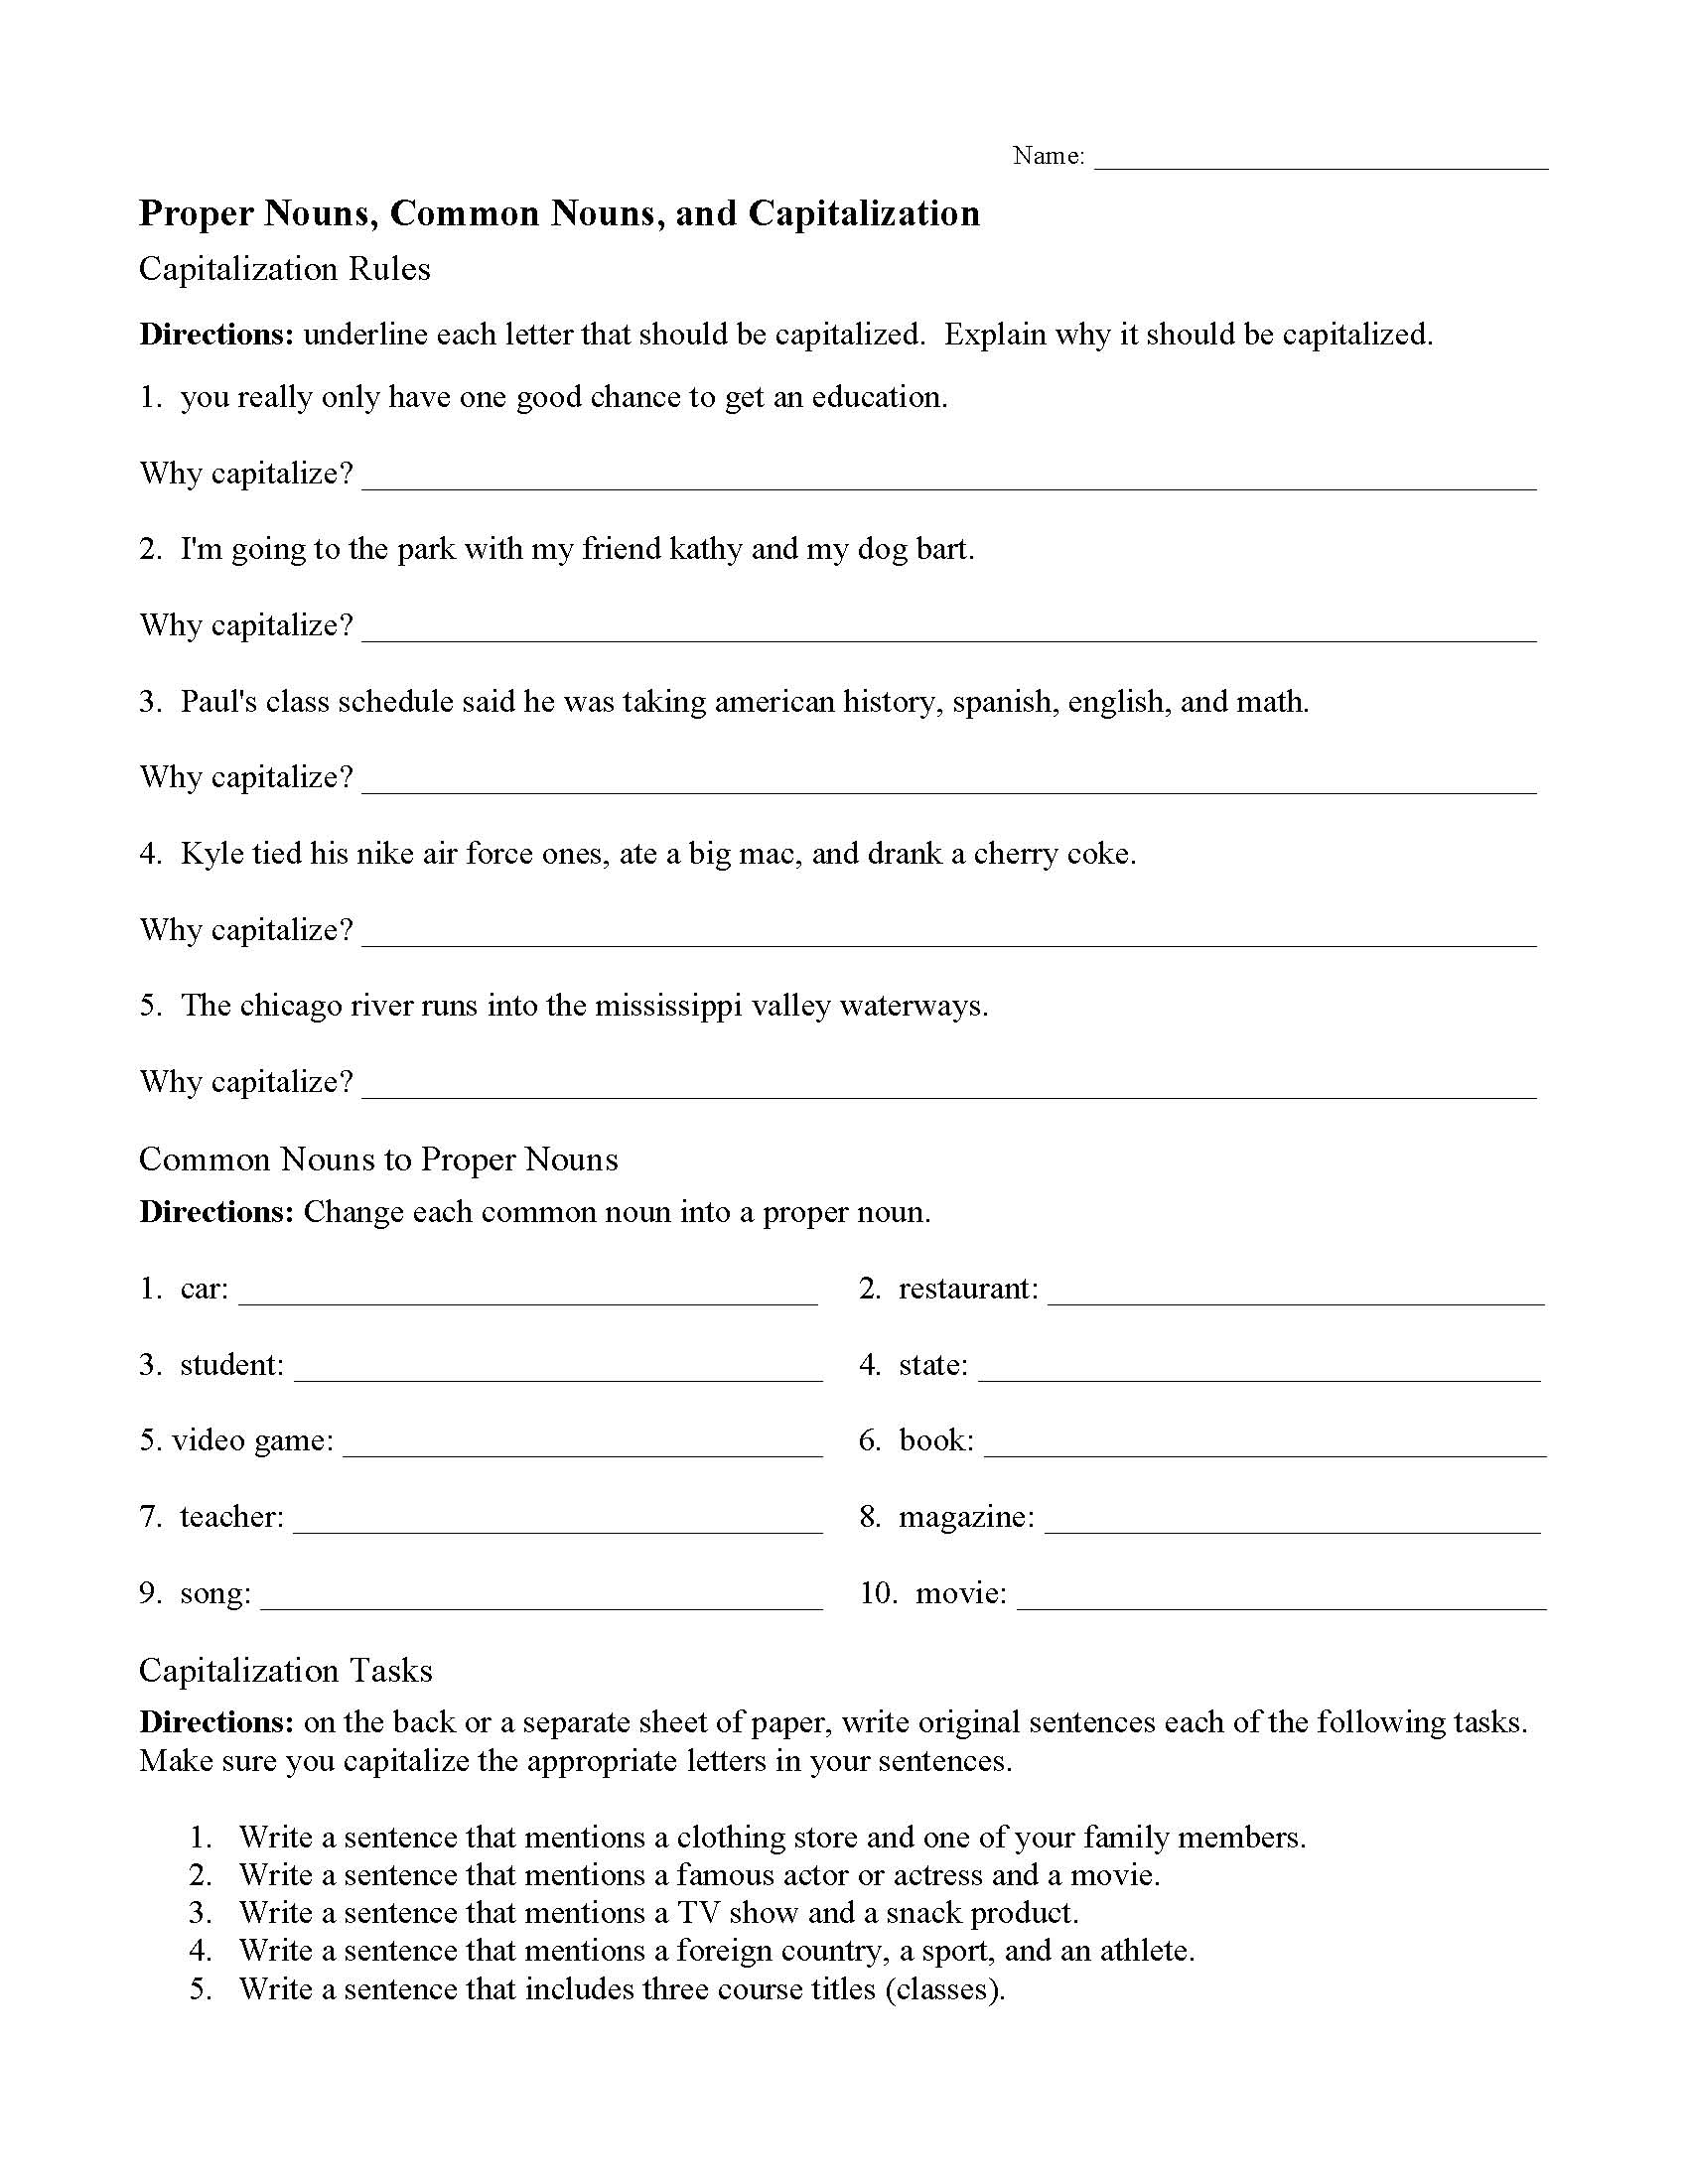 common-and-proper-nouns-worksheets-free-common-and-proper-nouns-worksheet-answer-key-by-robert